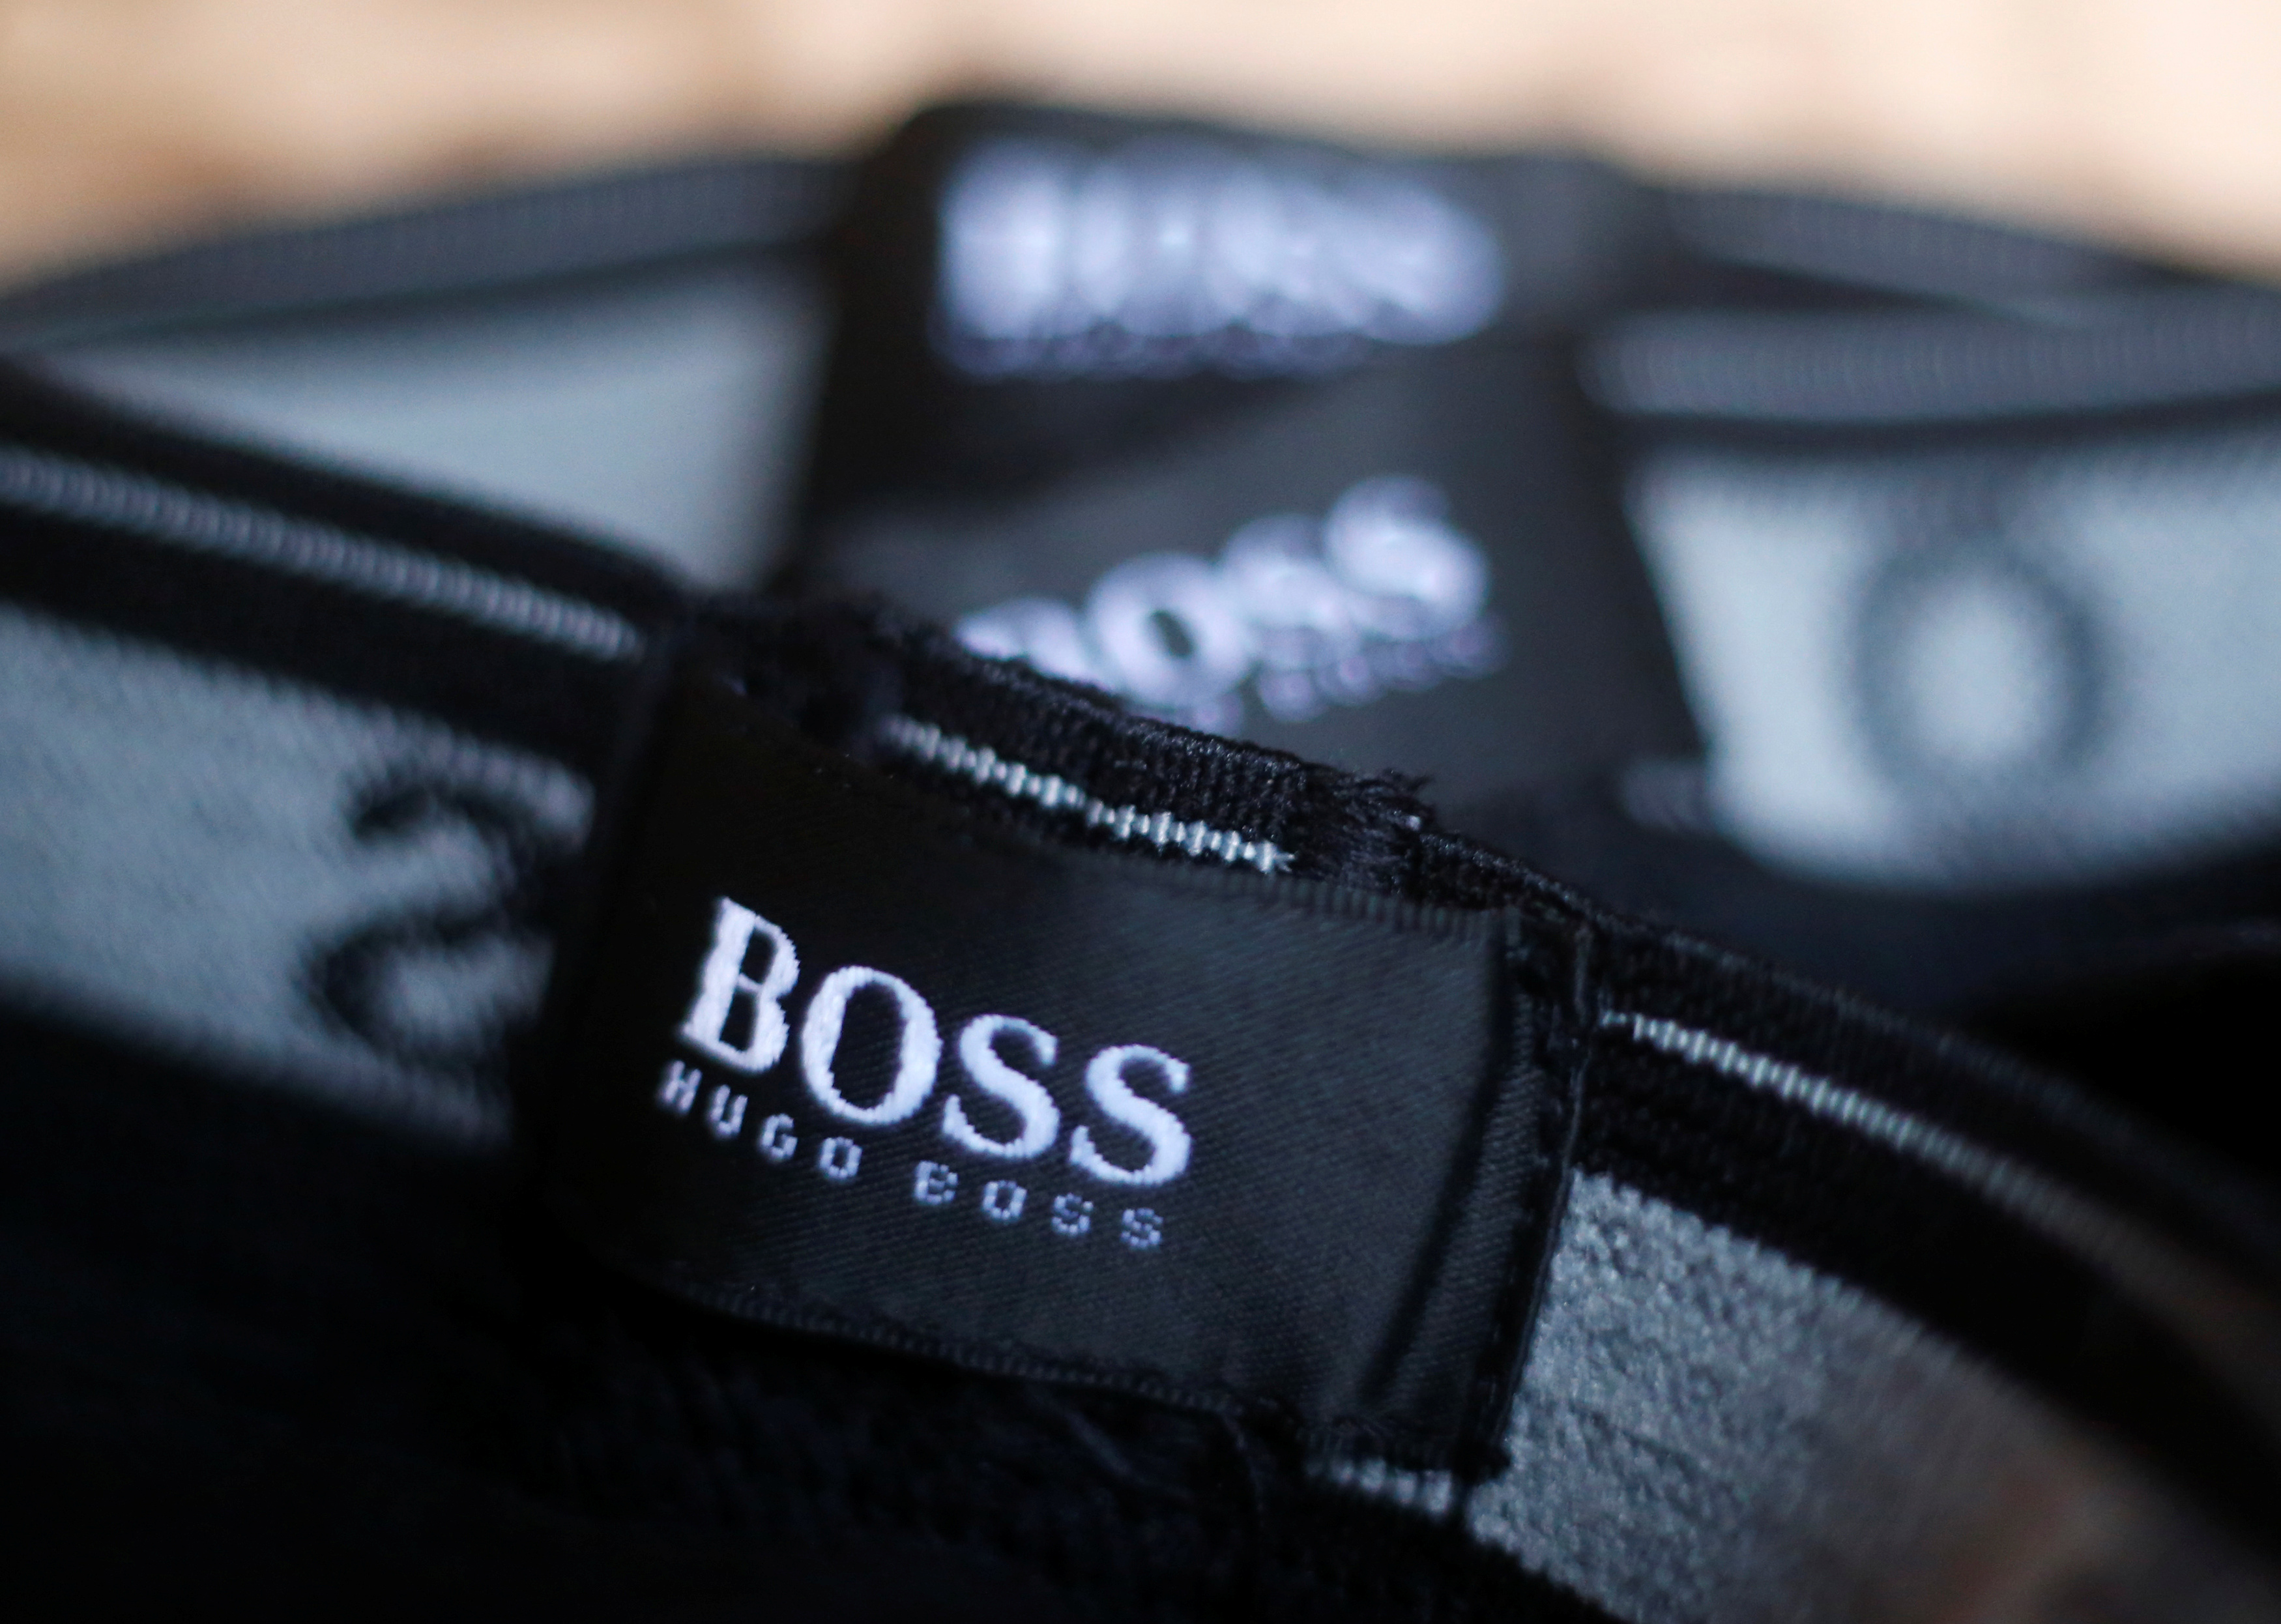 The logo of German fashion house Hugo Boss is seen on a clothing label at their outlet store in Mezingen near Stuttgart